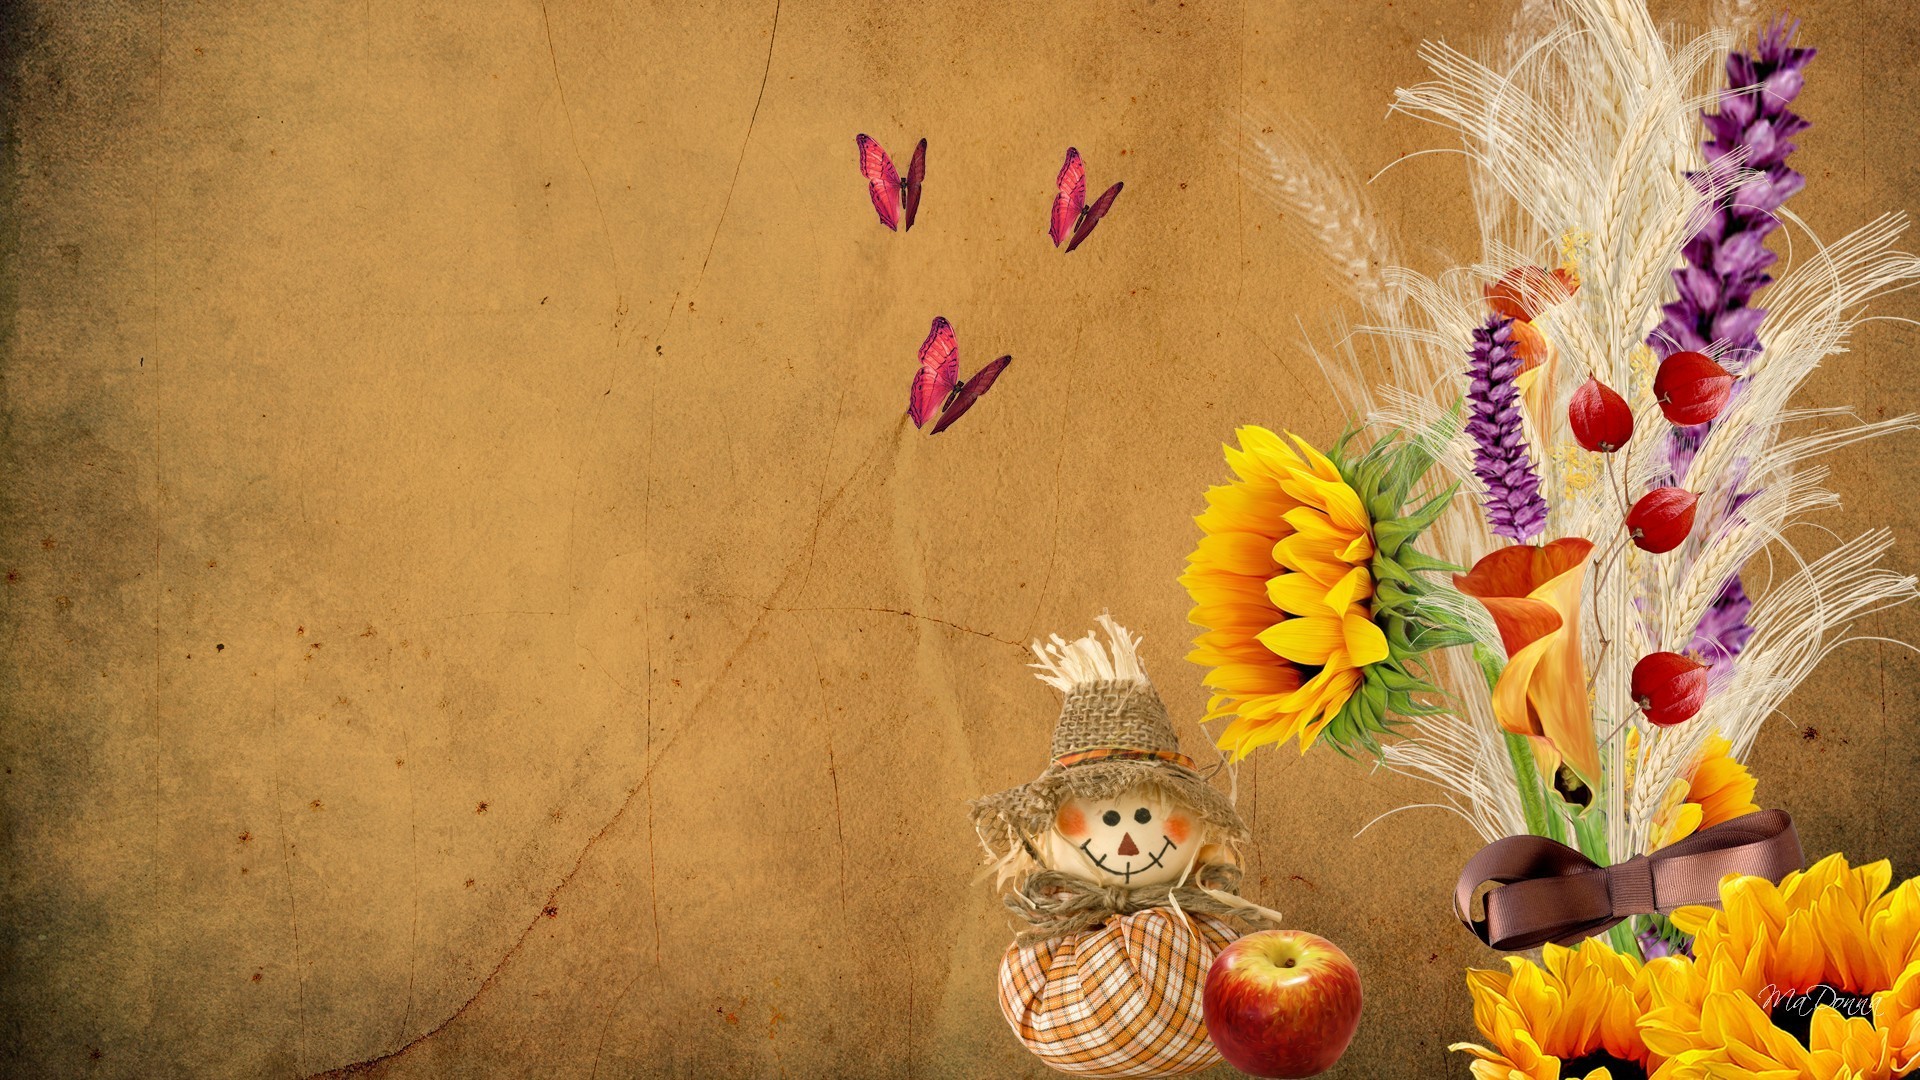 1920x1080 Seeds Tag - Tan Paper Sunflower Autumn Bow Parchment Ribbon Doll Apple  Wheat Seeds Fall Scare